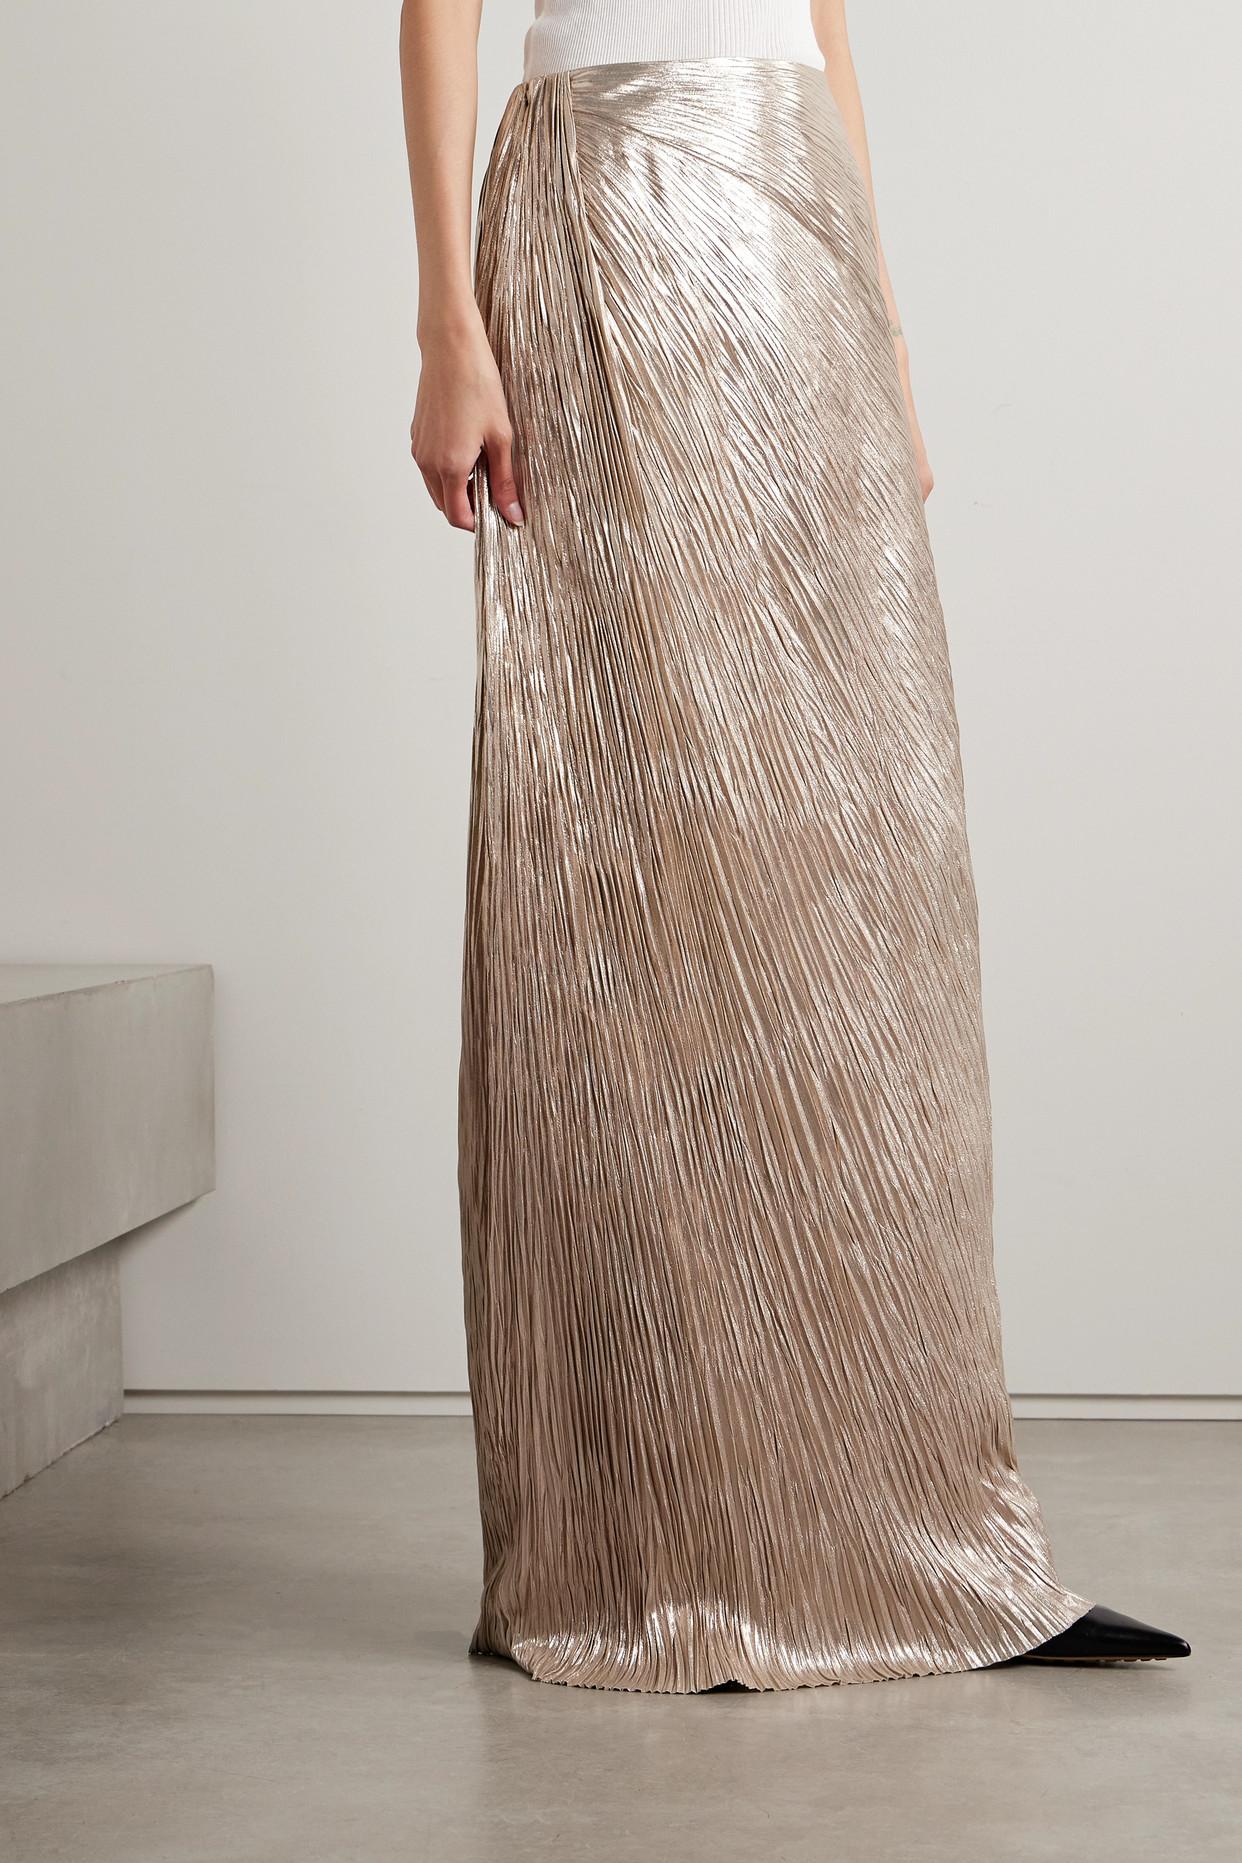 Ralph Lauren Collection Duvall Pleated Lamé Maxi Skirt in Natural ...